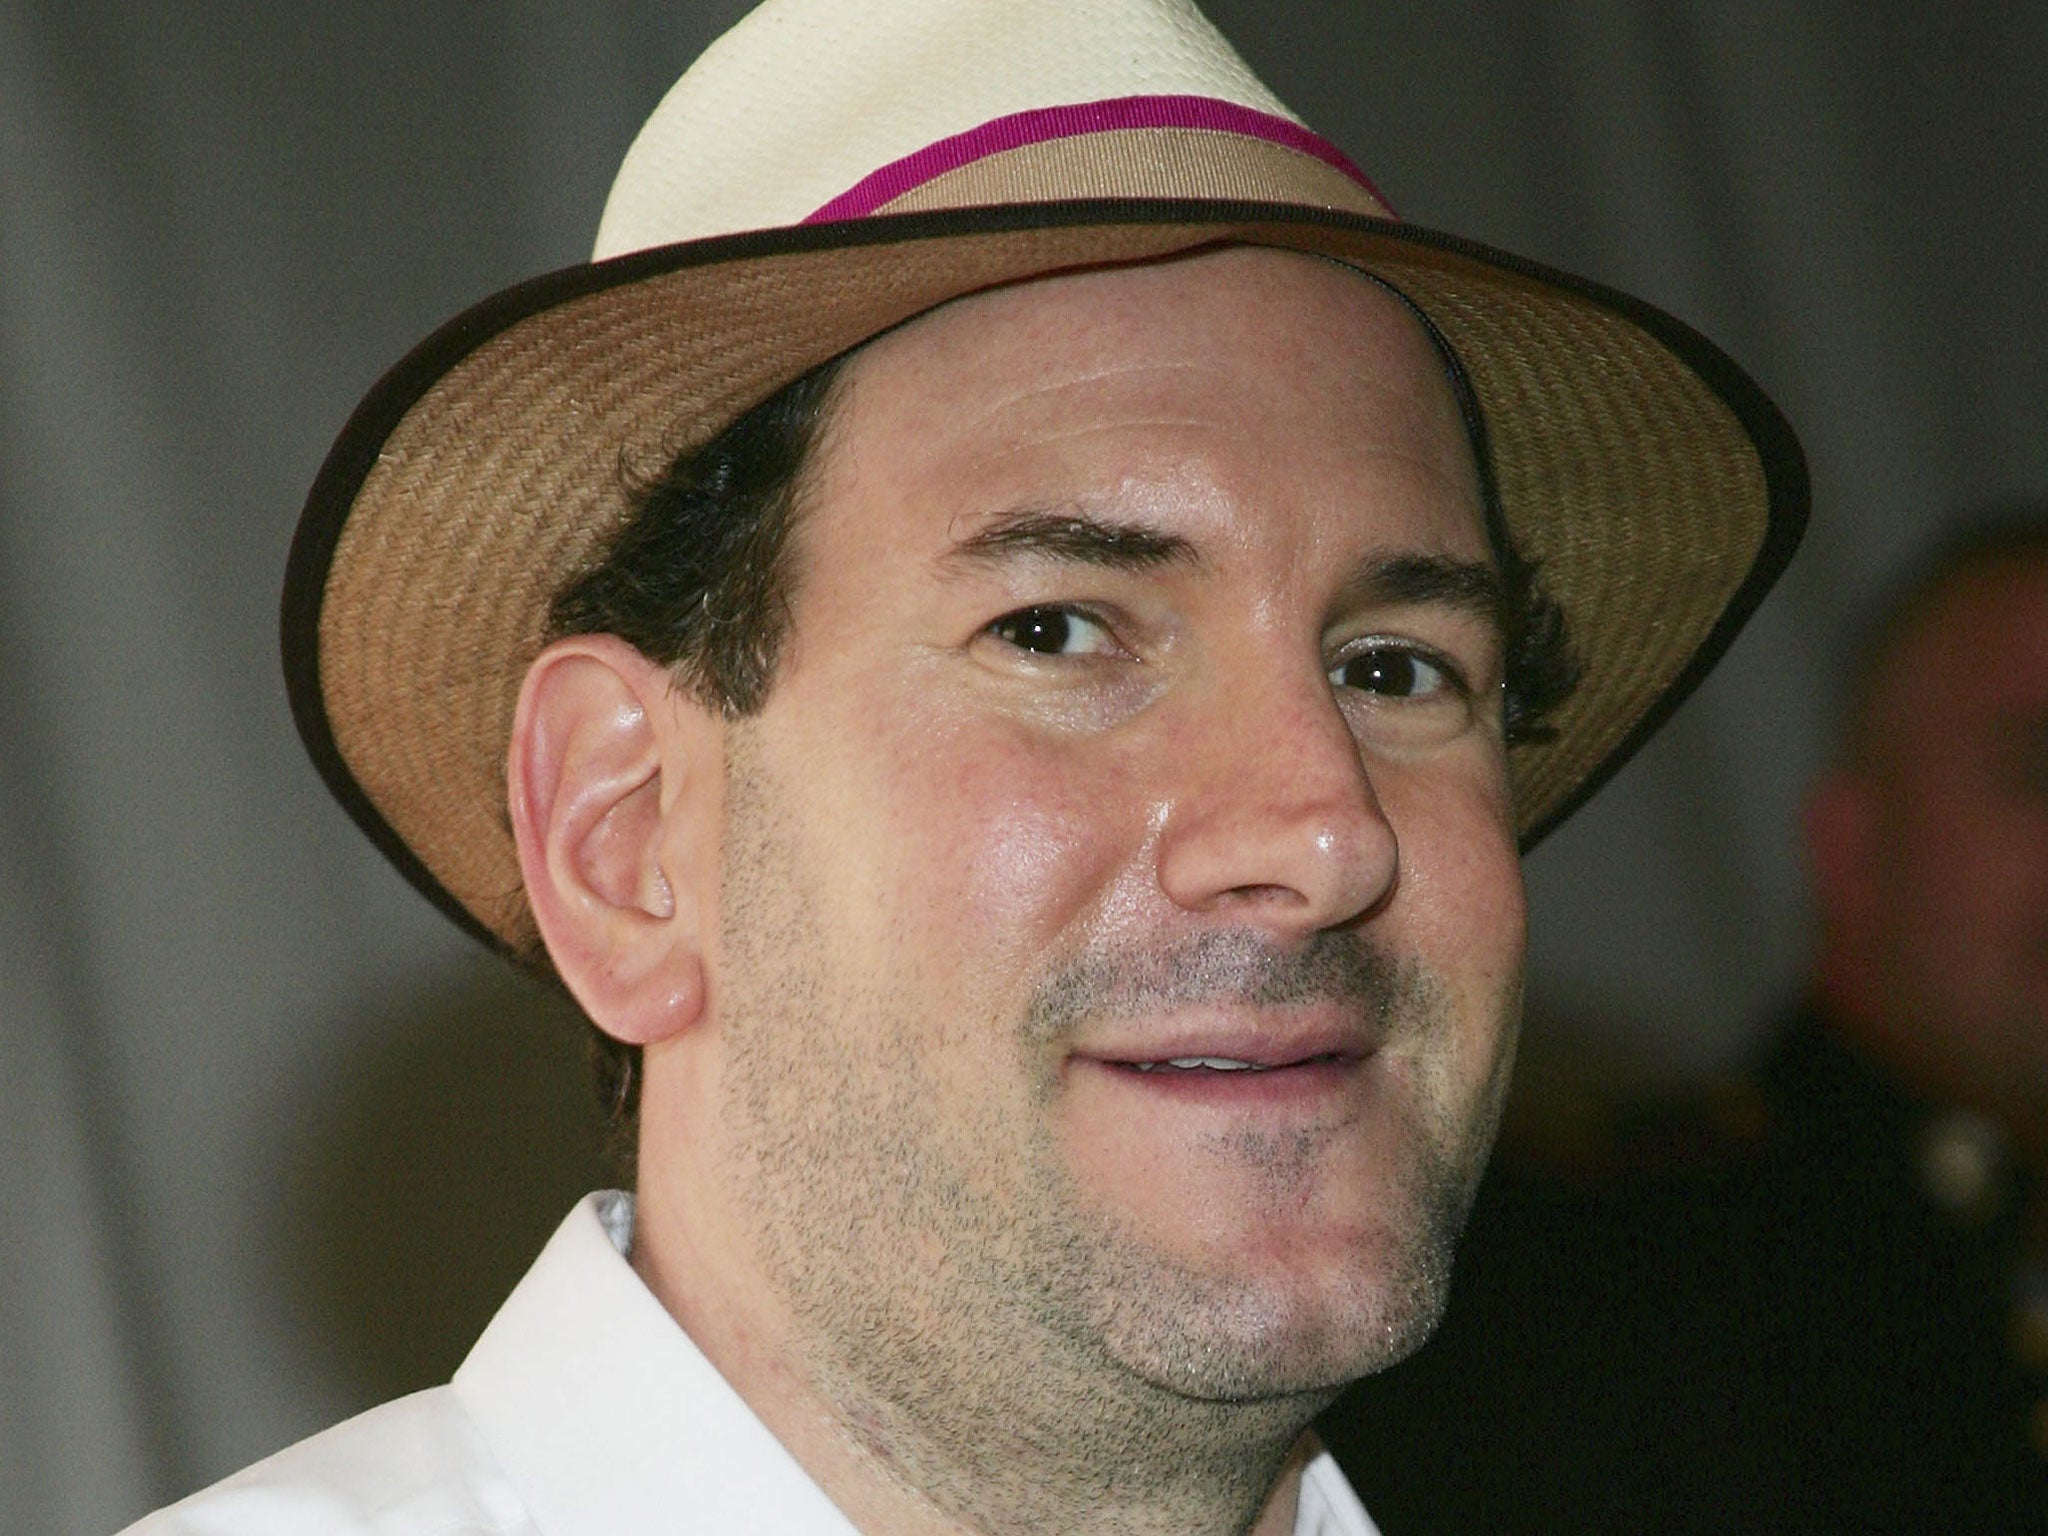 Matt Drudge, the founder of Drudge Report, who has mysteriously deleted every single tweet he has ever posted - except one